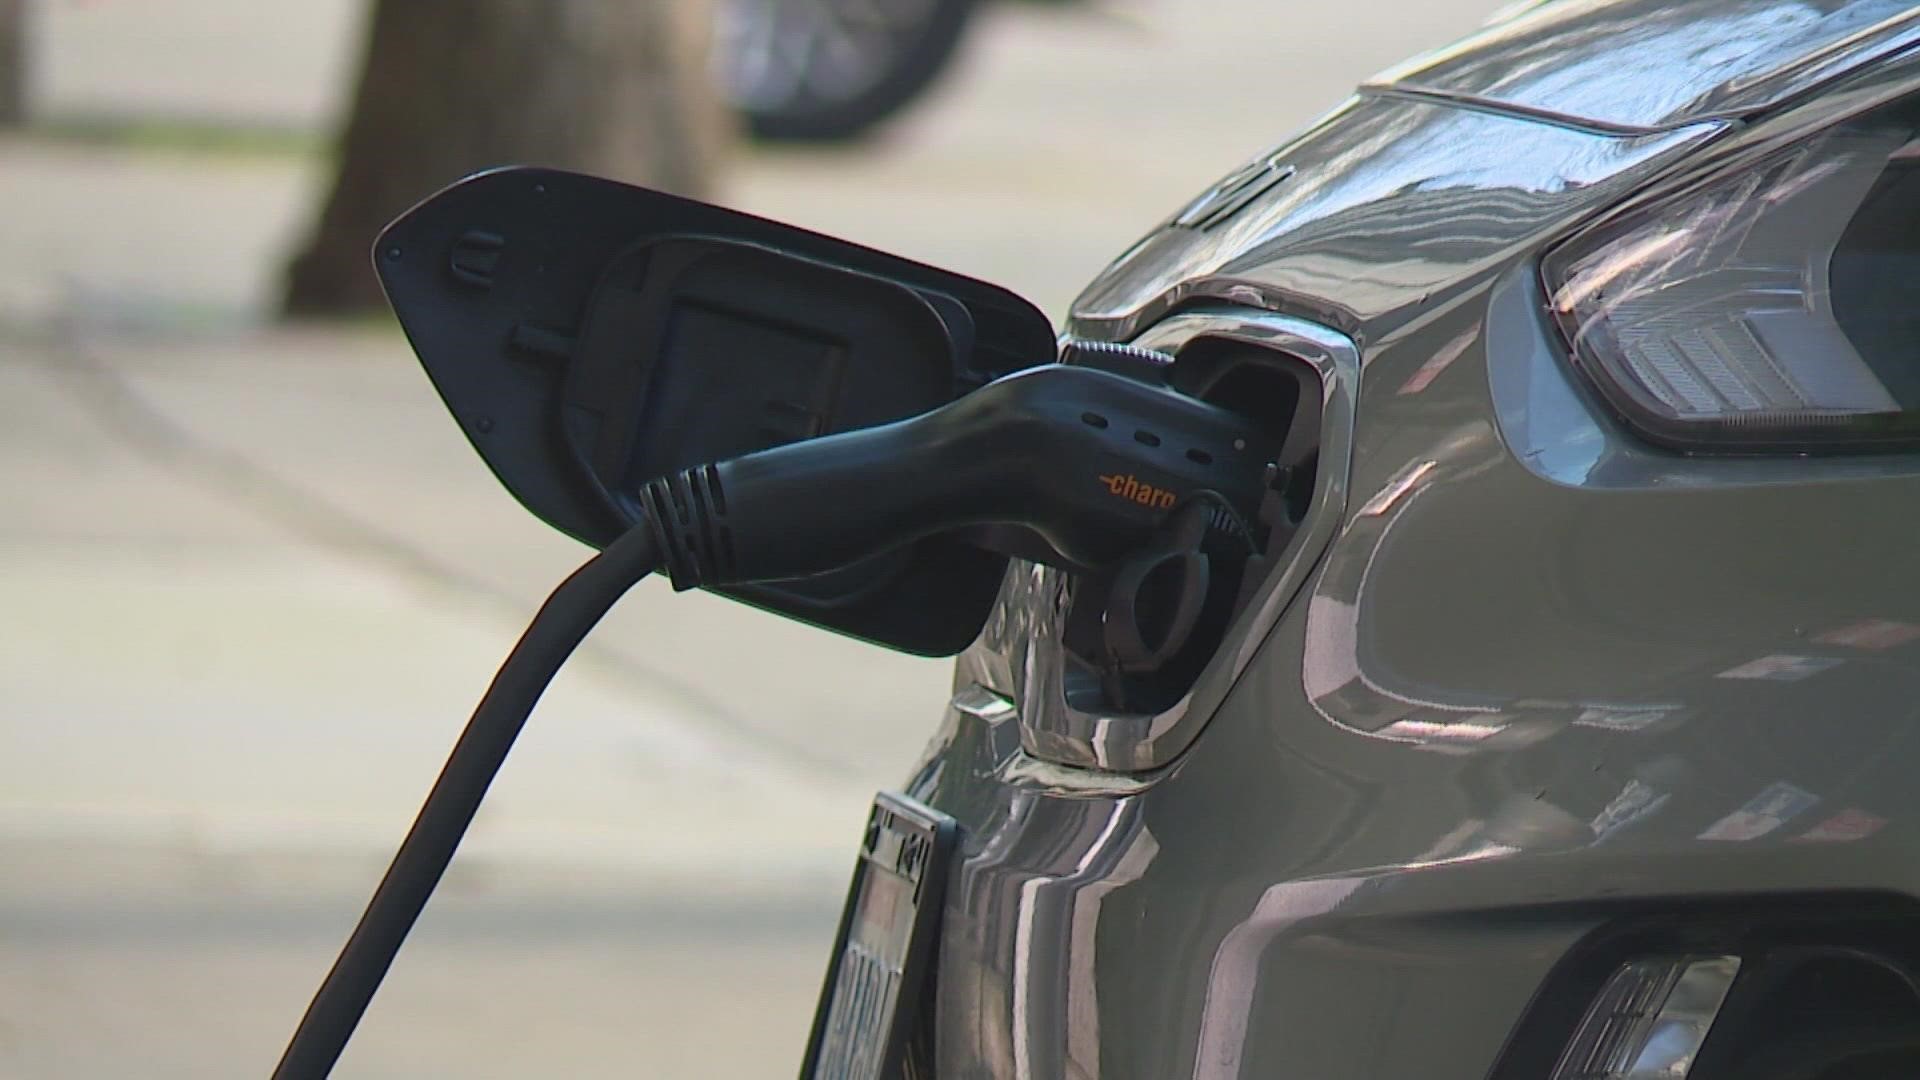 Gov. Jay Inslee announced on Wednesday that the state will ban the sale of new gasoline-powered cars starting in 2030.